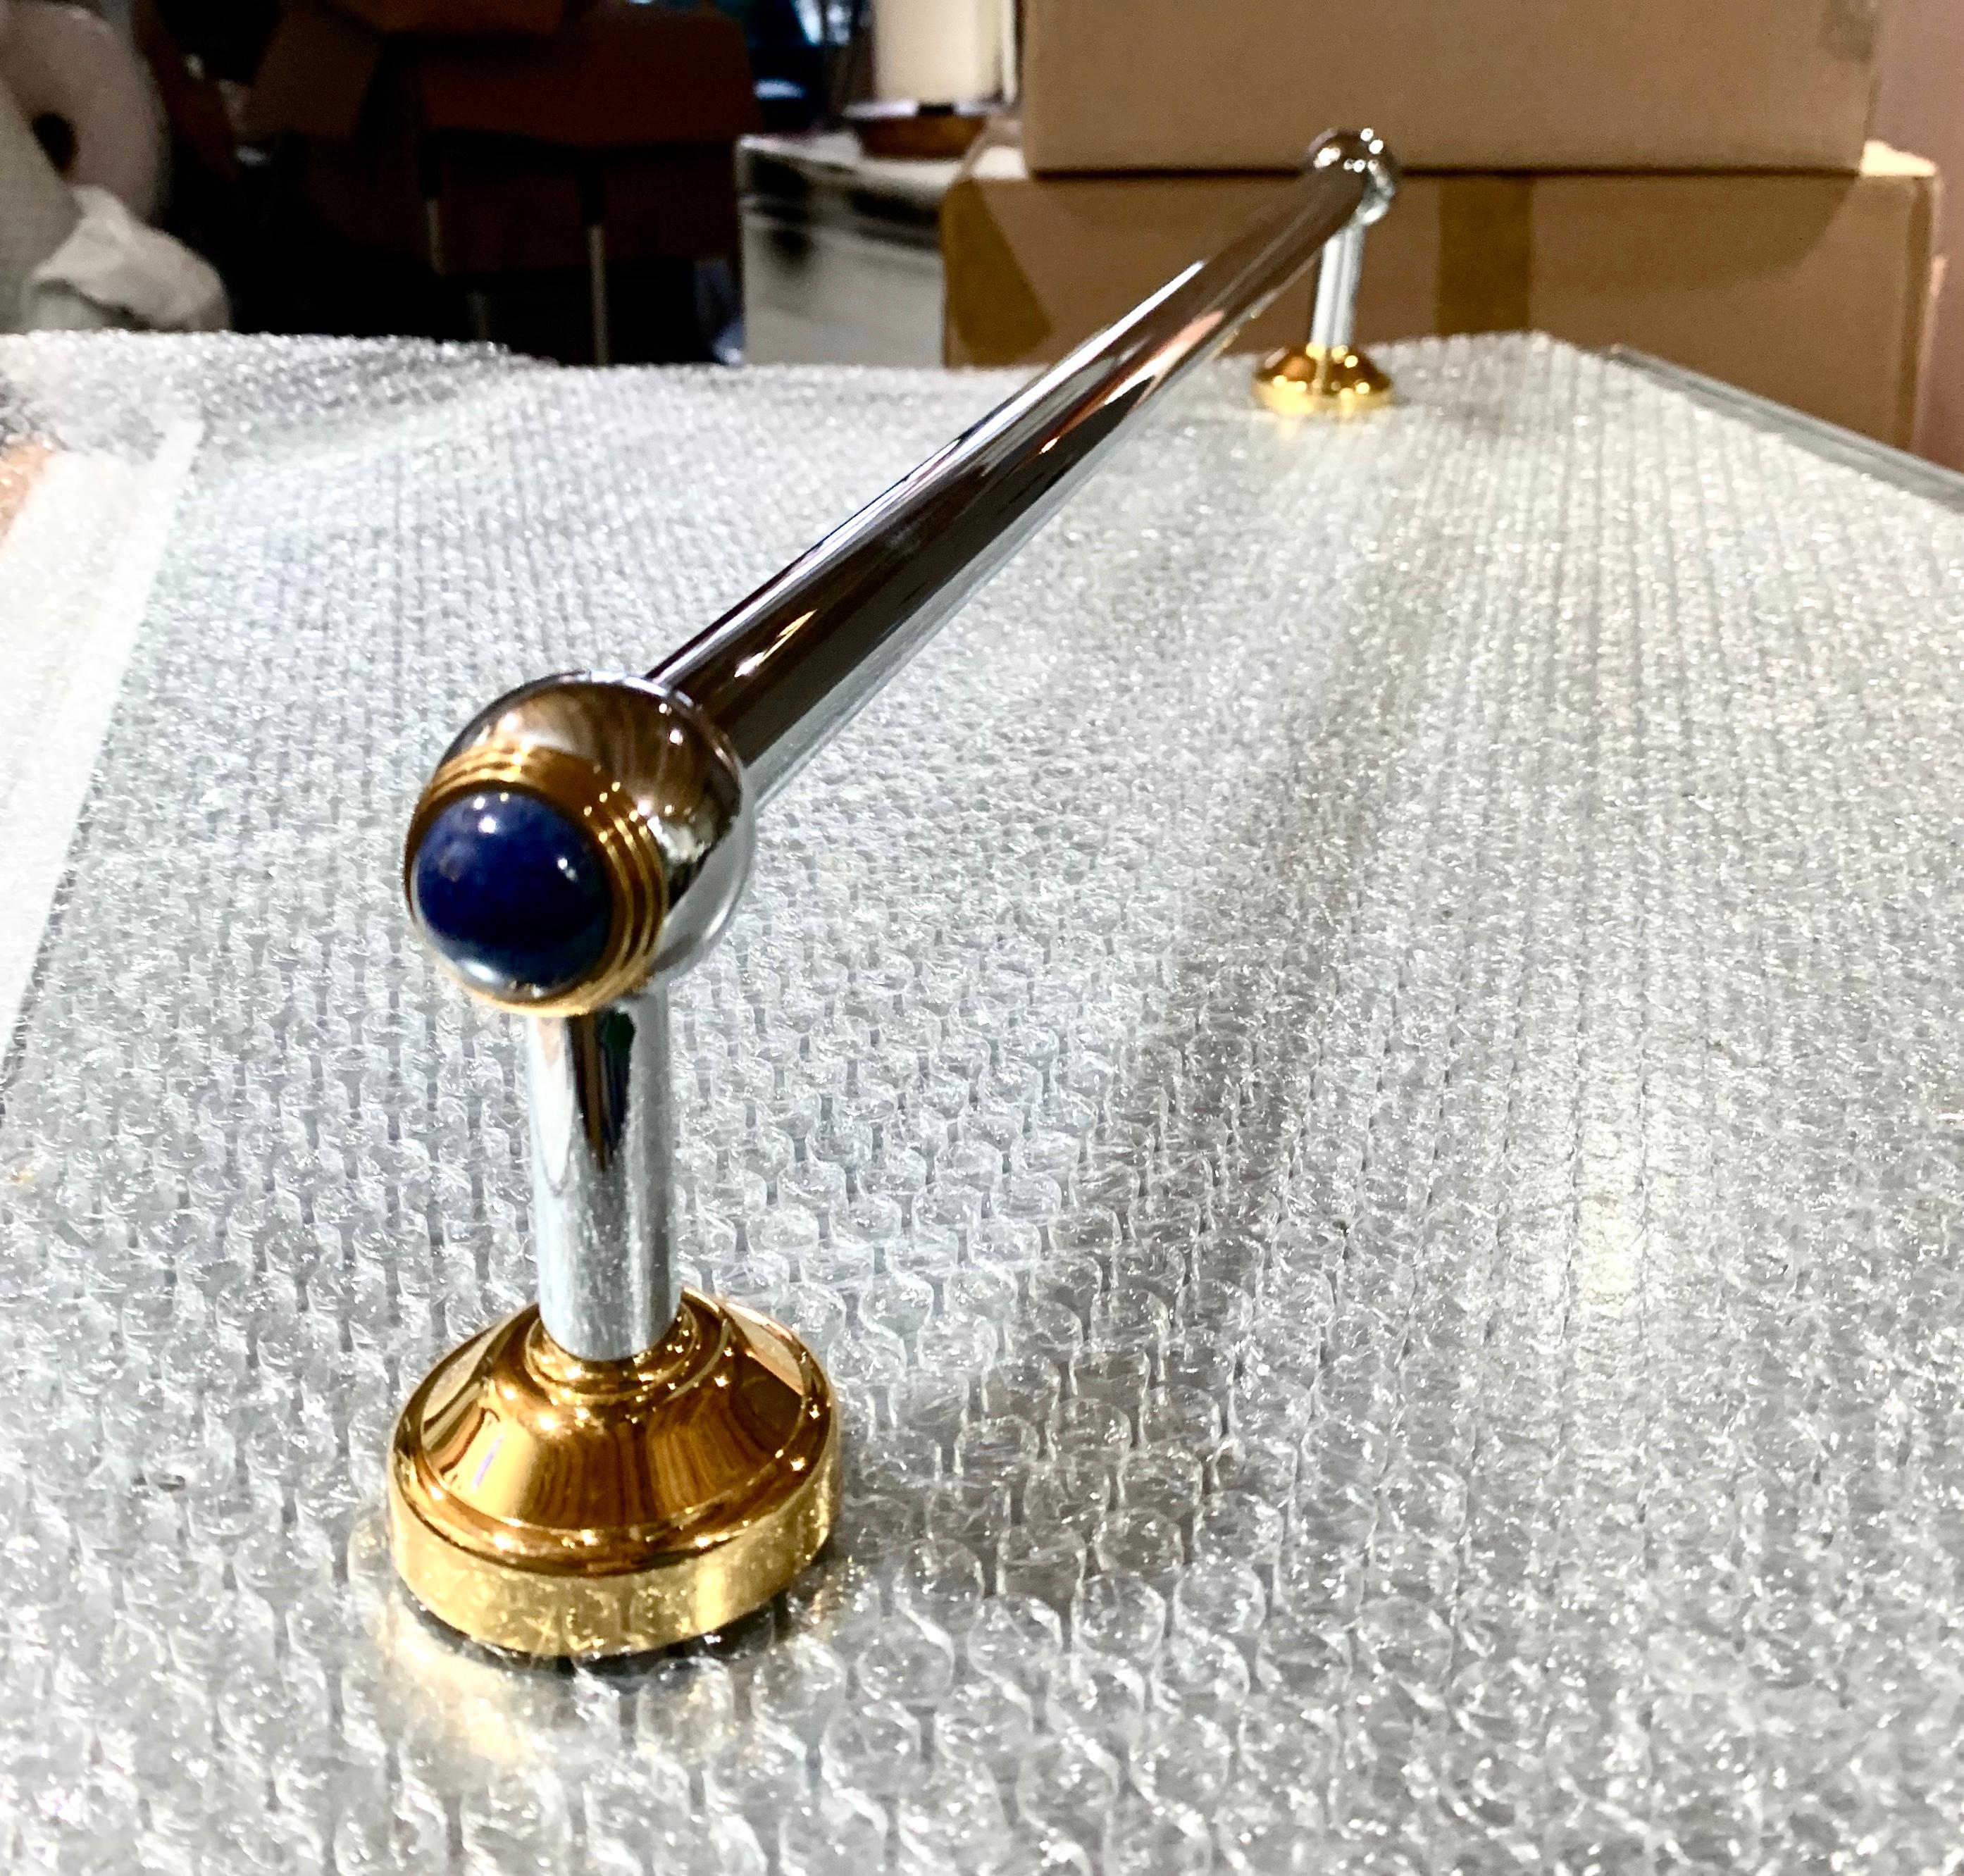 Blue Lapiz and 24-karat gold-clad and chromed bronze towel rack by Serdaneli, Paris. Vintage display piece, never installed. For over 45 years, Serdaneli, the 